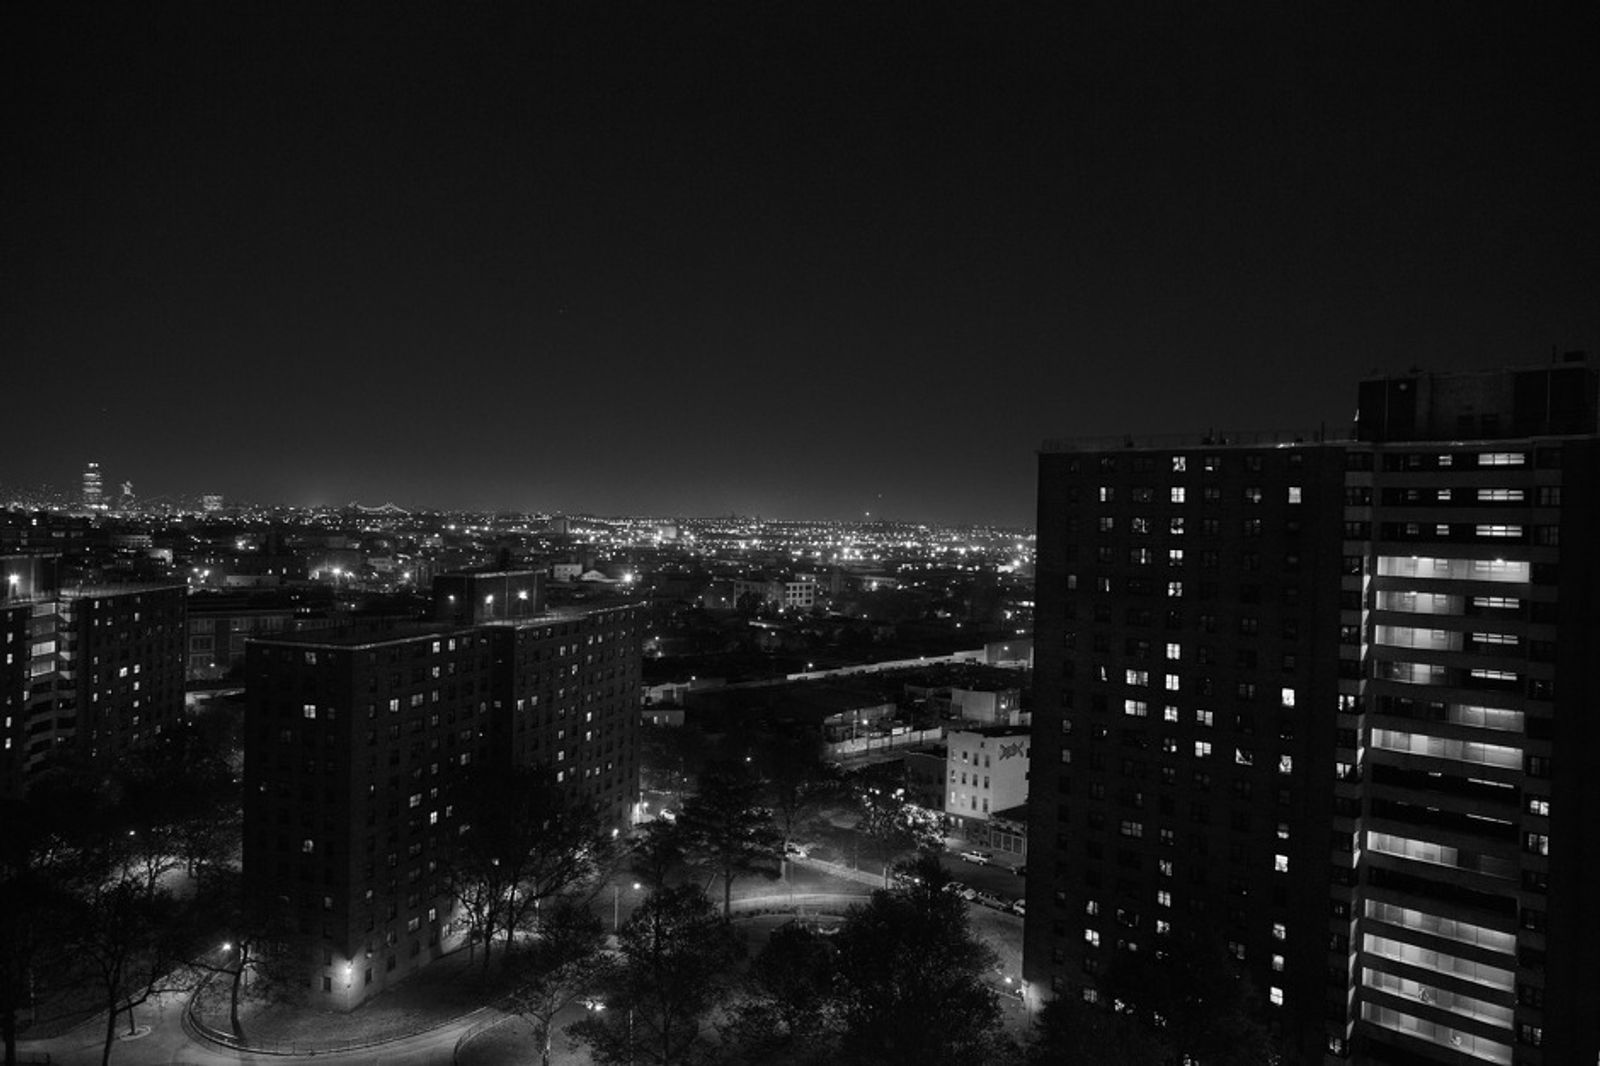 © Nicolas Enriquez - View of Manhattan at night from the top of one of the building at the Bushwick housing projects in Brooklyn.